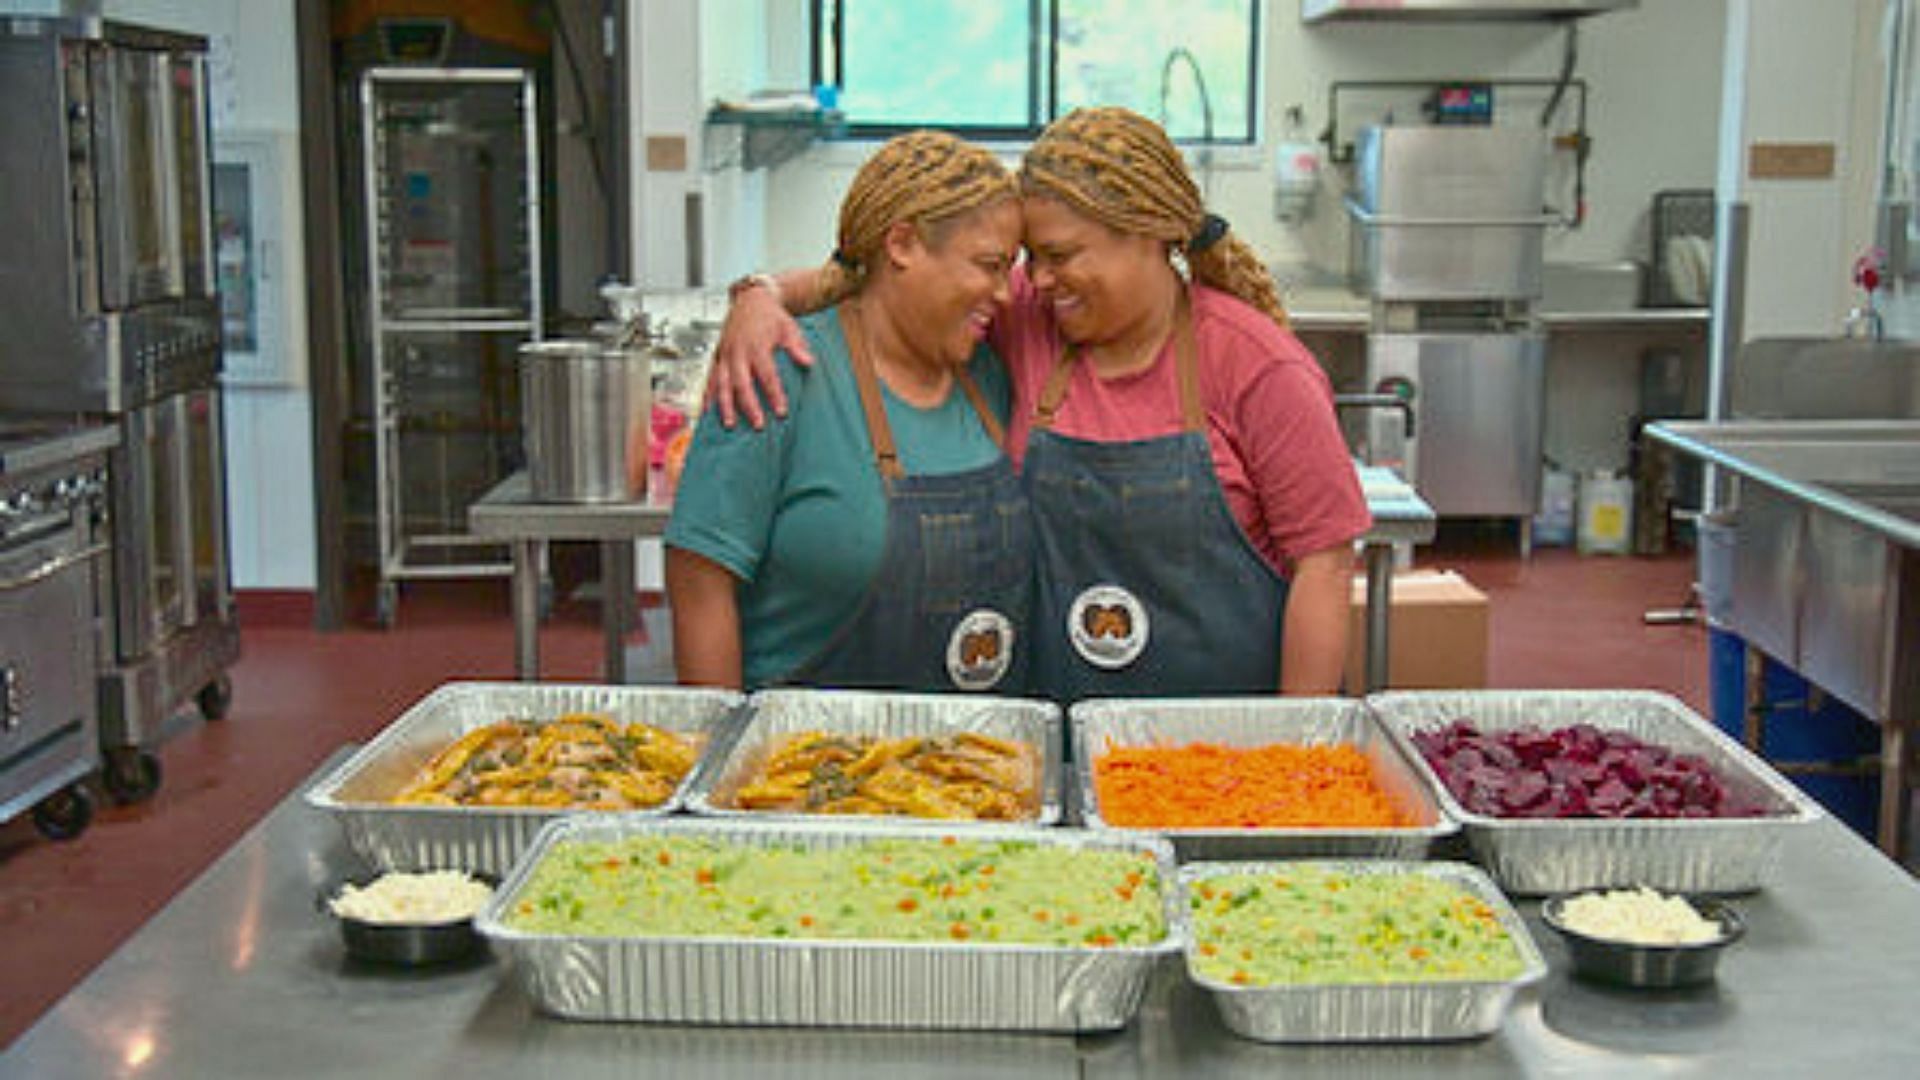 Pam and Wendy are partners in a catering business as well (Image via Netflix)